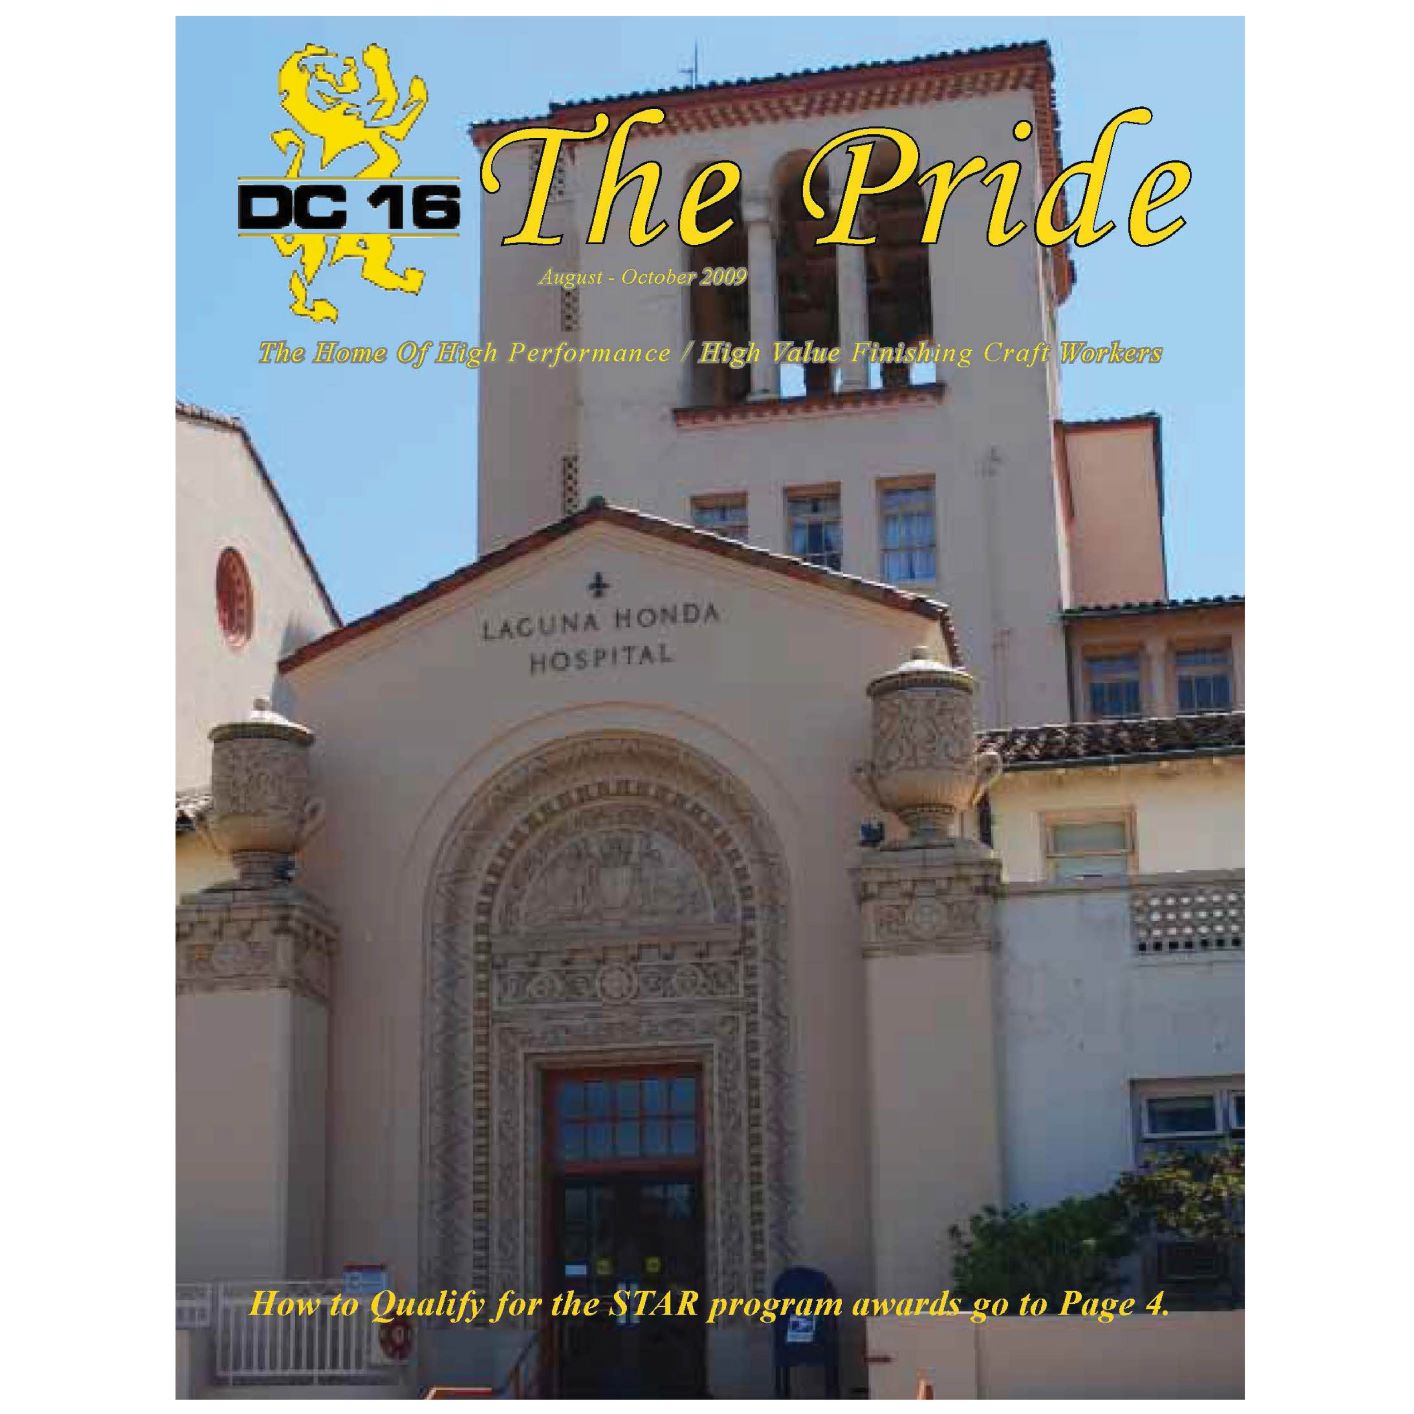 Image from the Gallery: The Pride August – October 2009